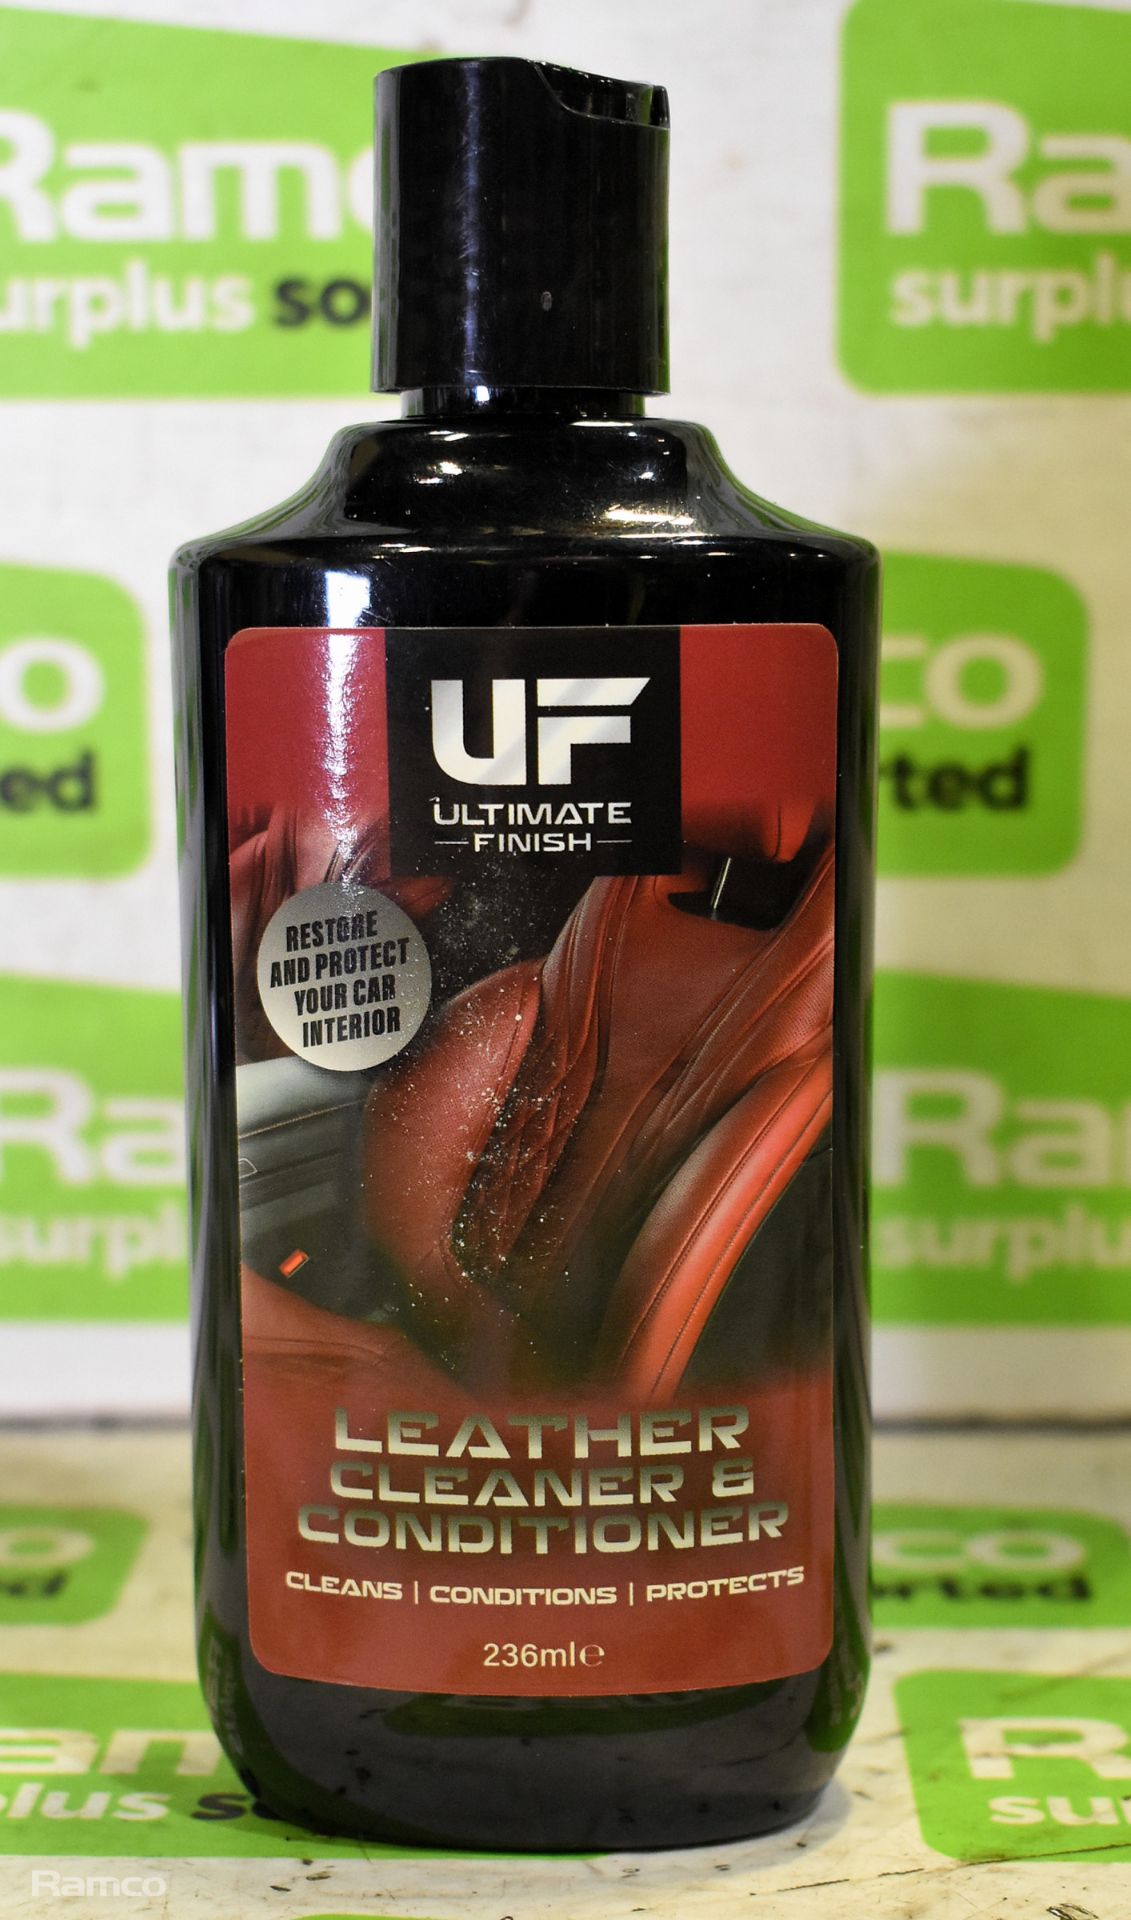 48x bottles of Ultimate Finish leather cleaner and conditioner - 236ml - Image 2 of 4